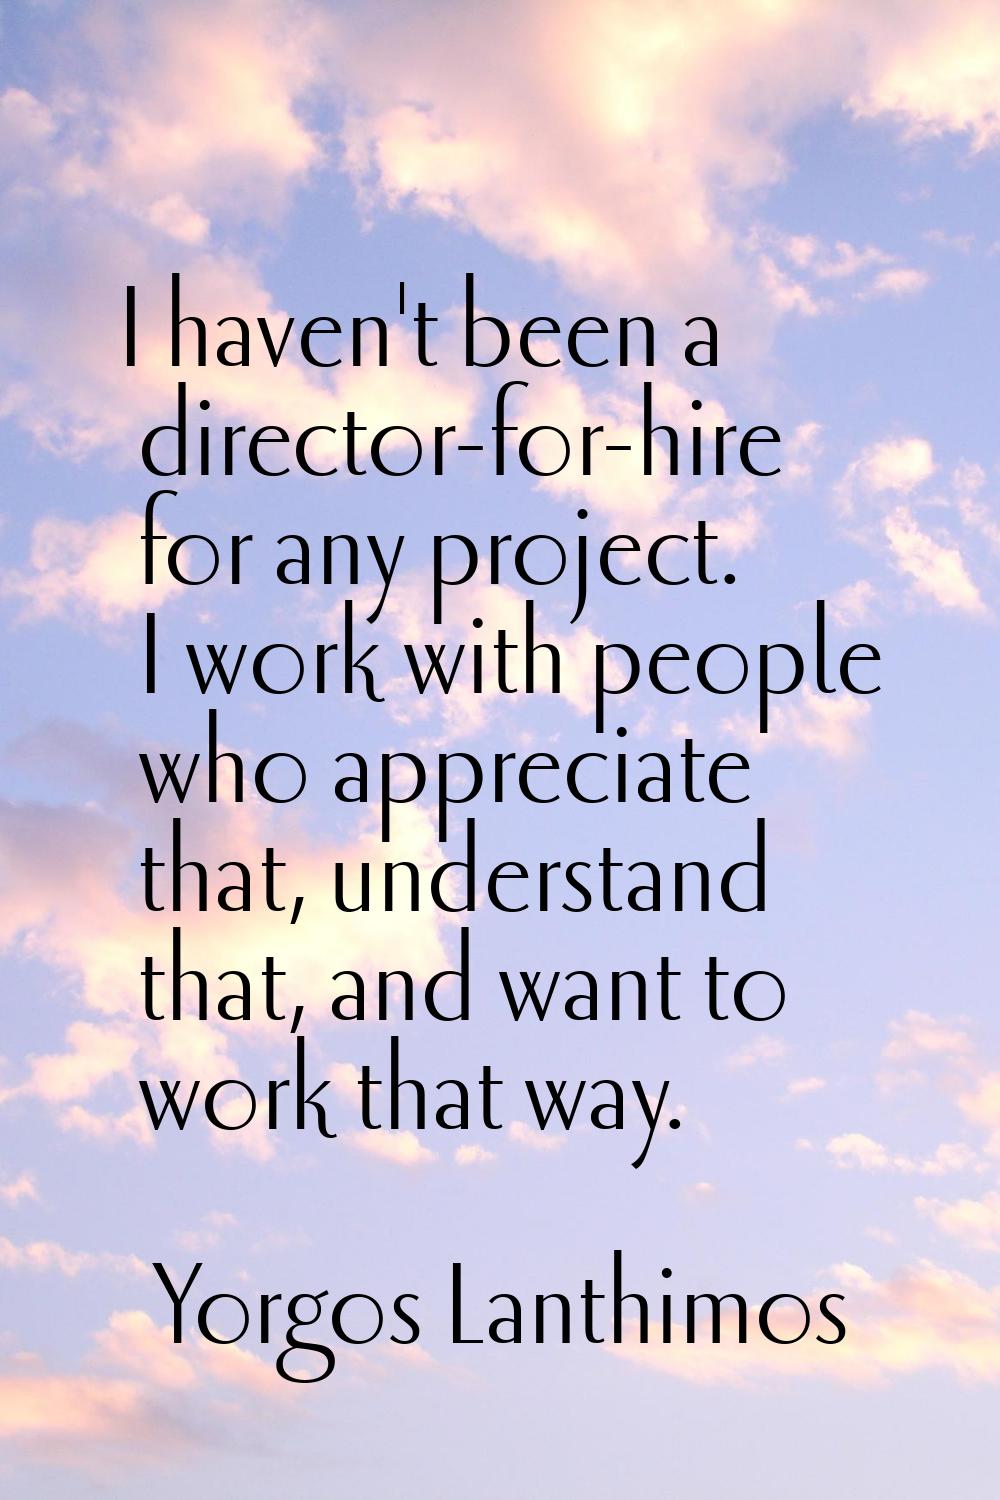 I haven't been a director-for-hire for any project. I work with people who appreciate that, underst